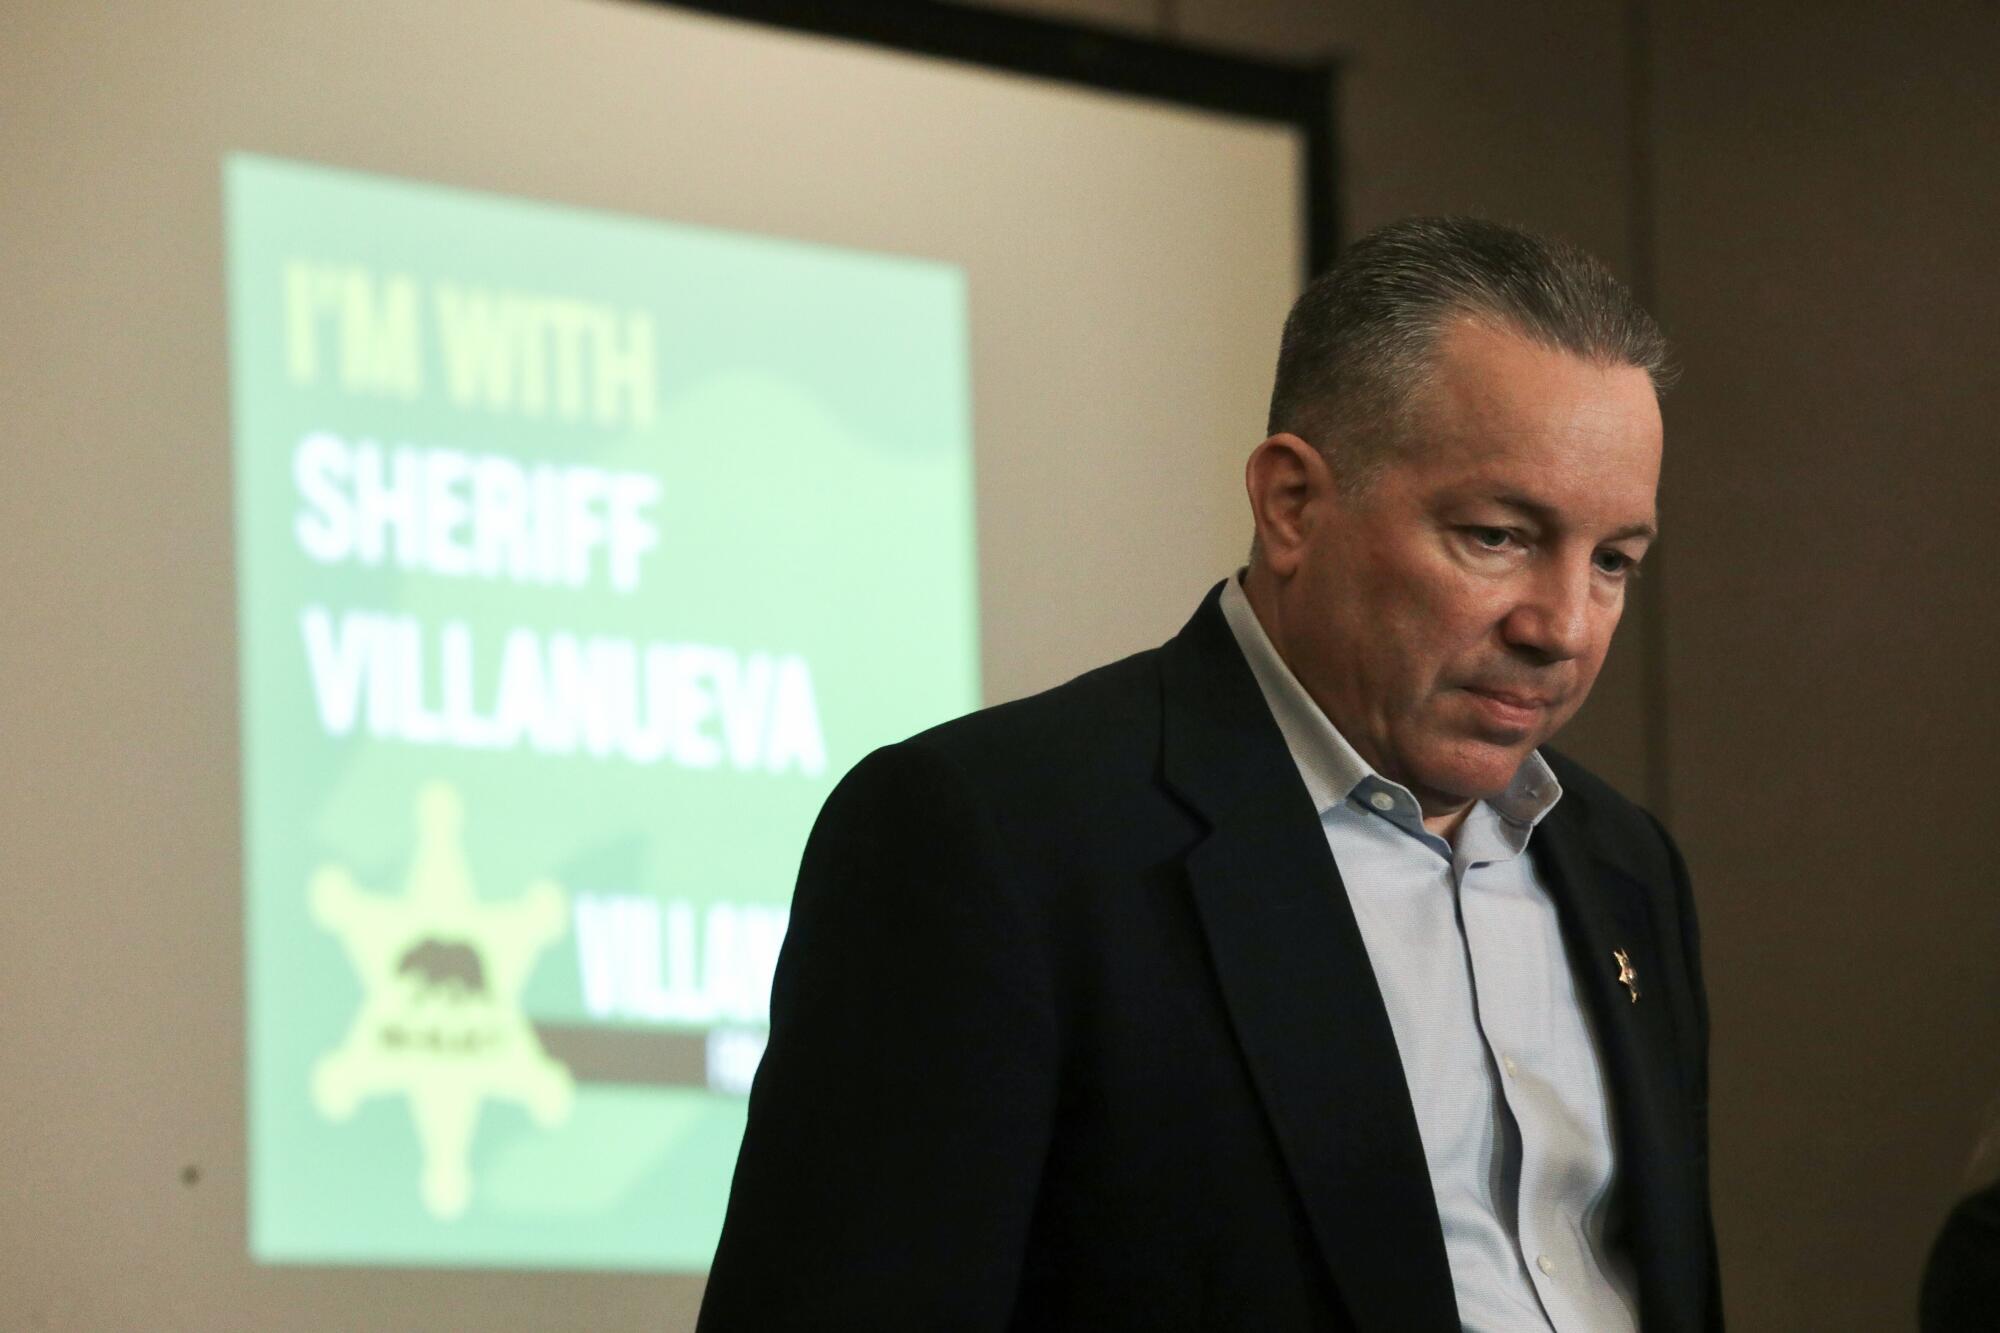  Sheriff Alex Villanueva speaks to a reporter during an election night rally on Tuesday, Nov. 8.